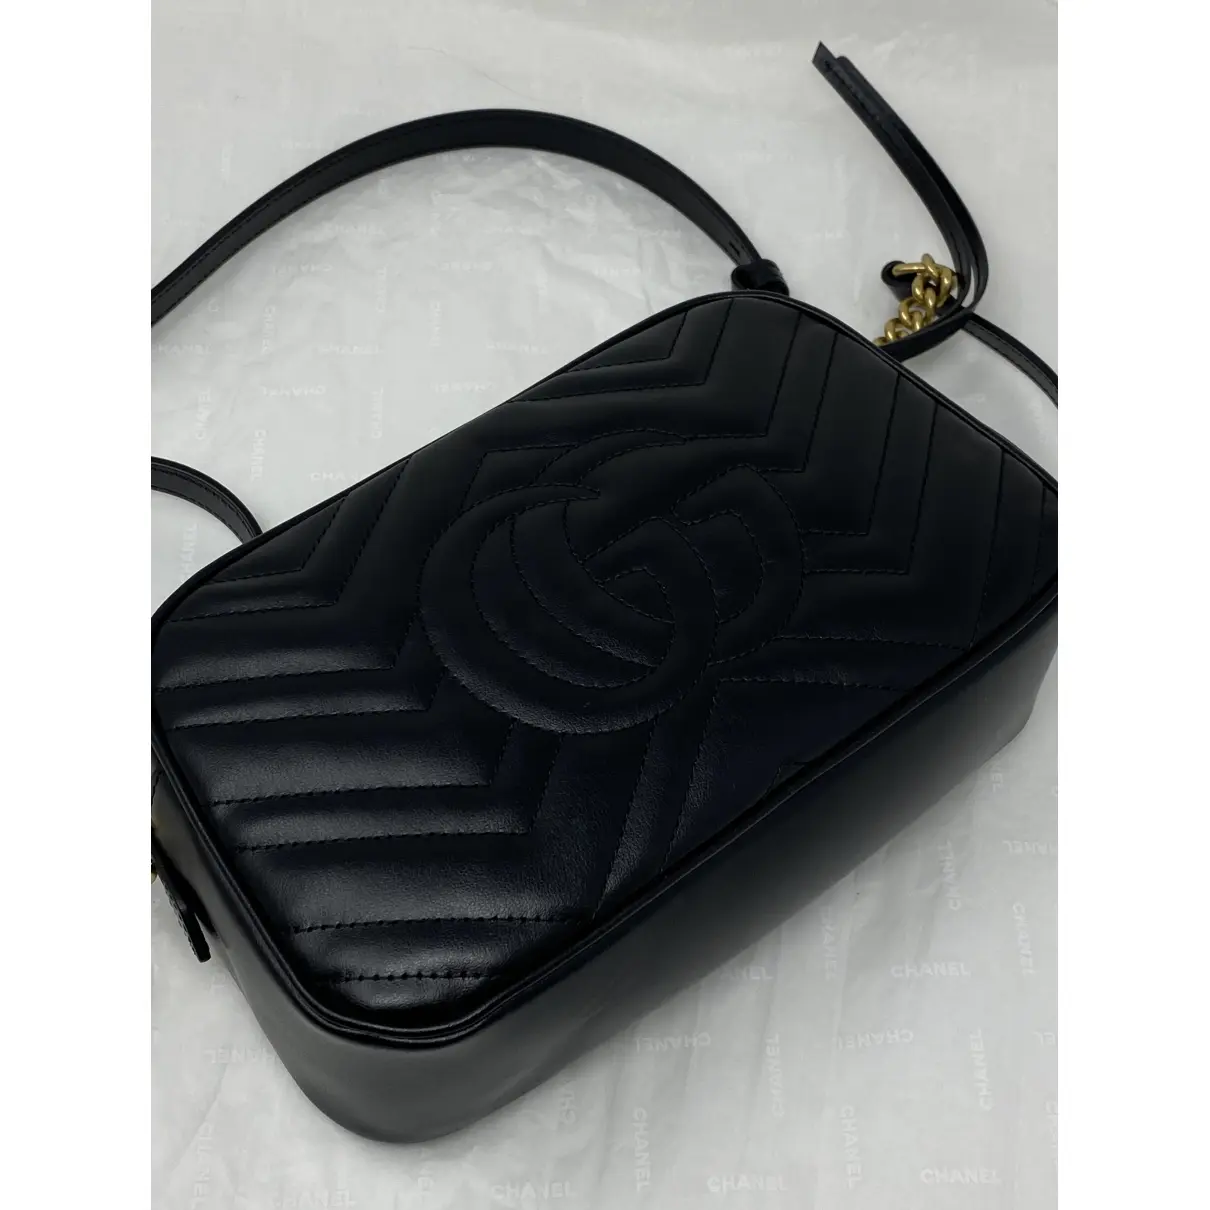 Buy Gucci GG Marmont leather crossbody bag online